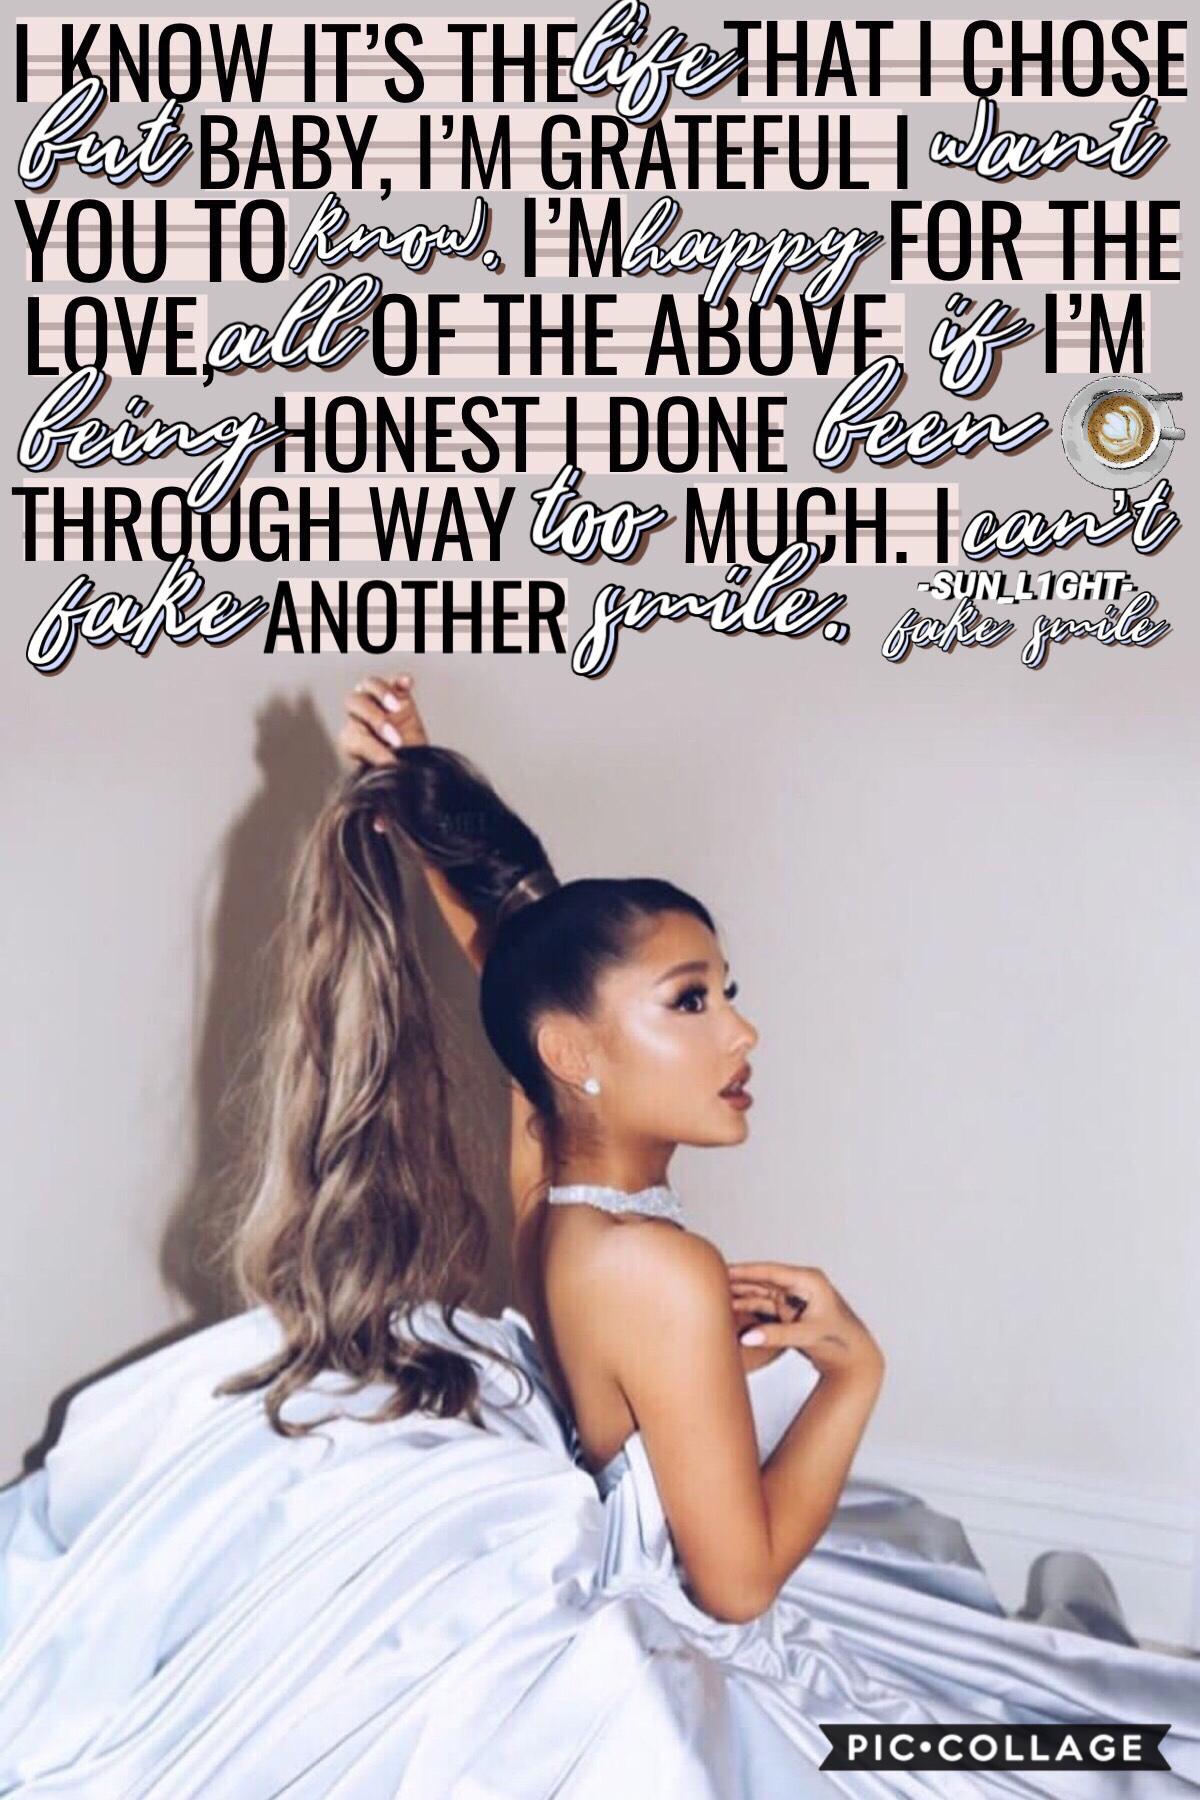 ➳》tap《↞
‘fake smile’ by Ariana Grande ☕️ 👄 
qotd: what’s the weather like?🌱🍃
aotd: sun showers🌦☔️
❝30-3-19❞ 
